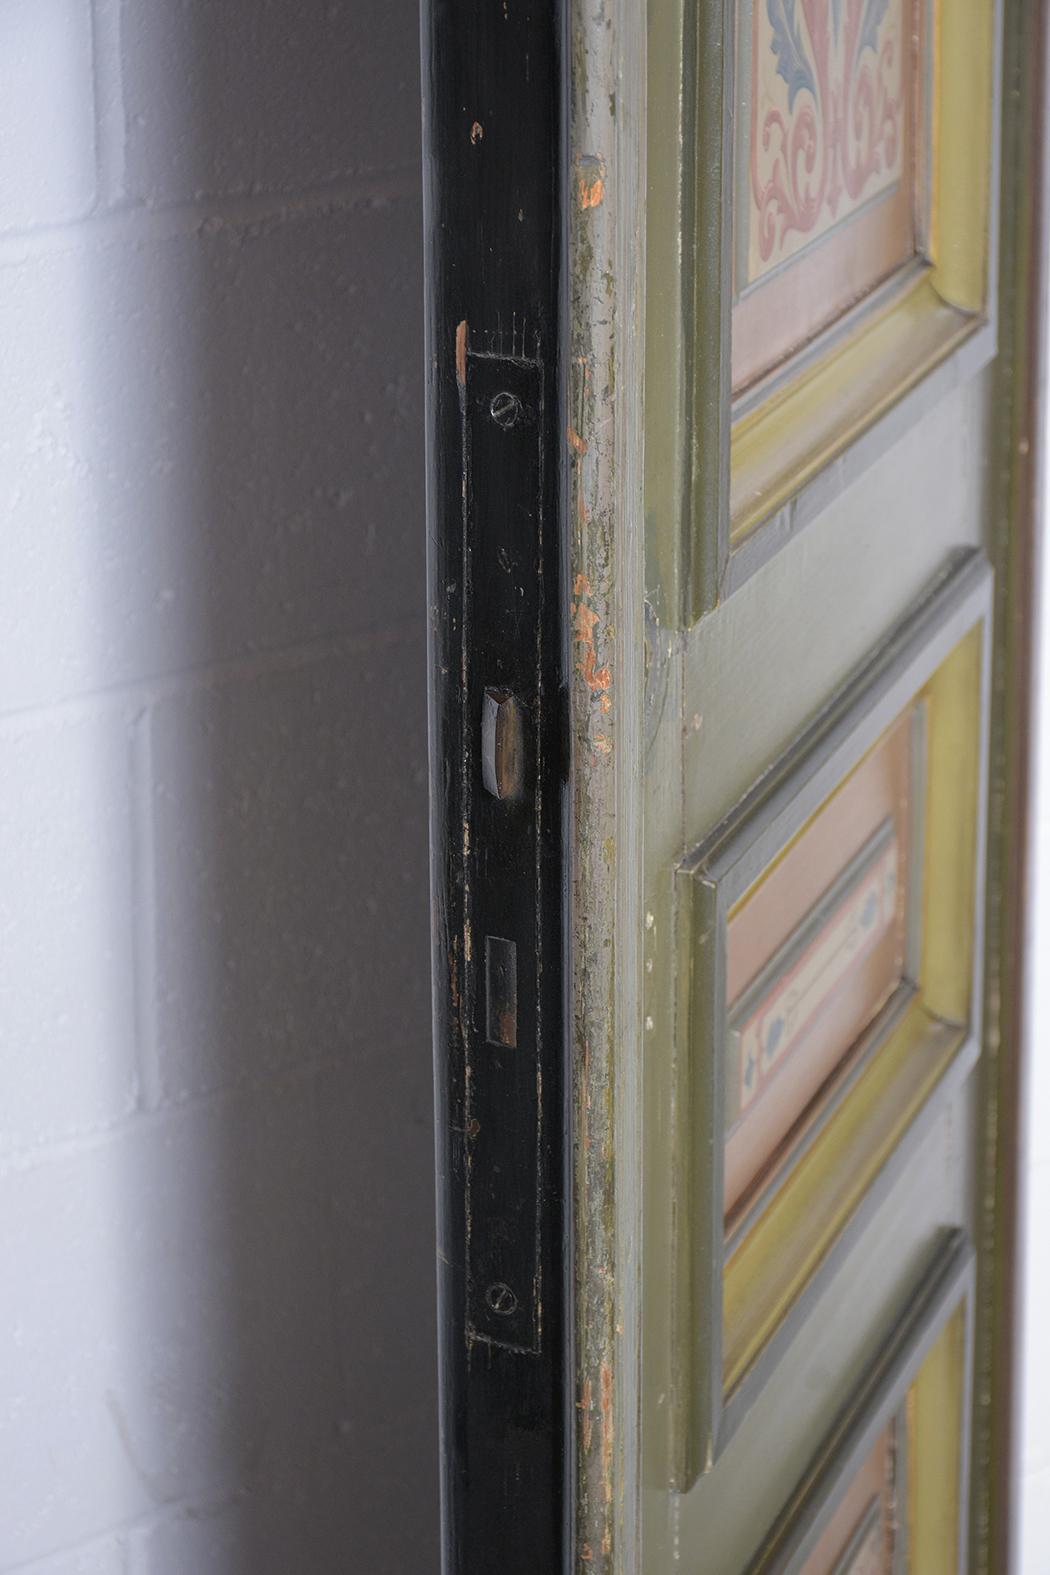 Pair of 19th Century French Painted Paneling Doors